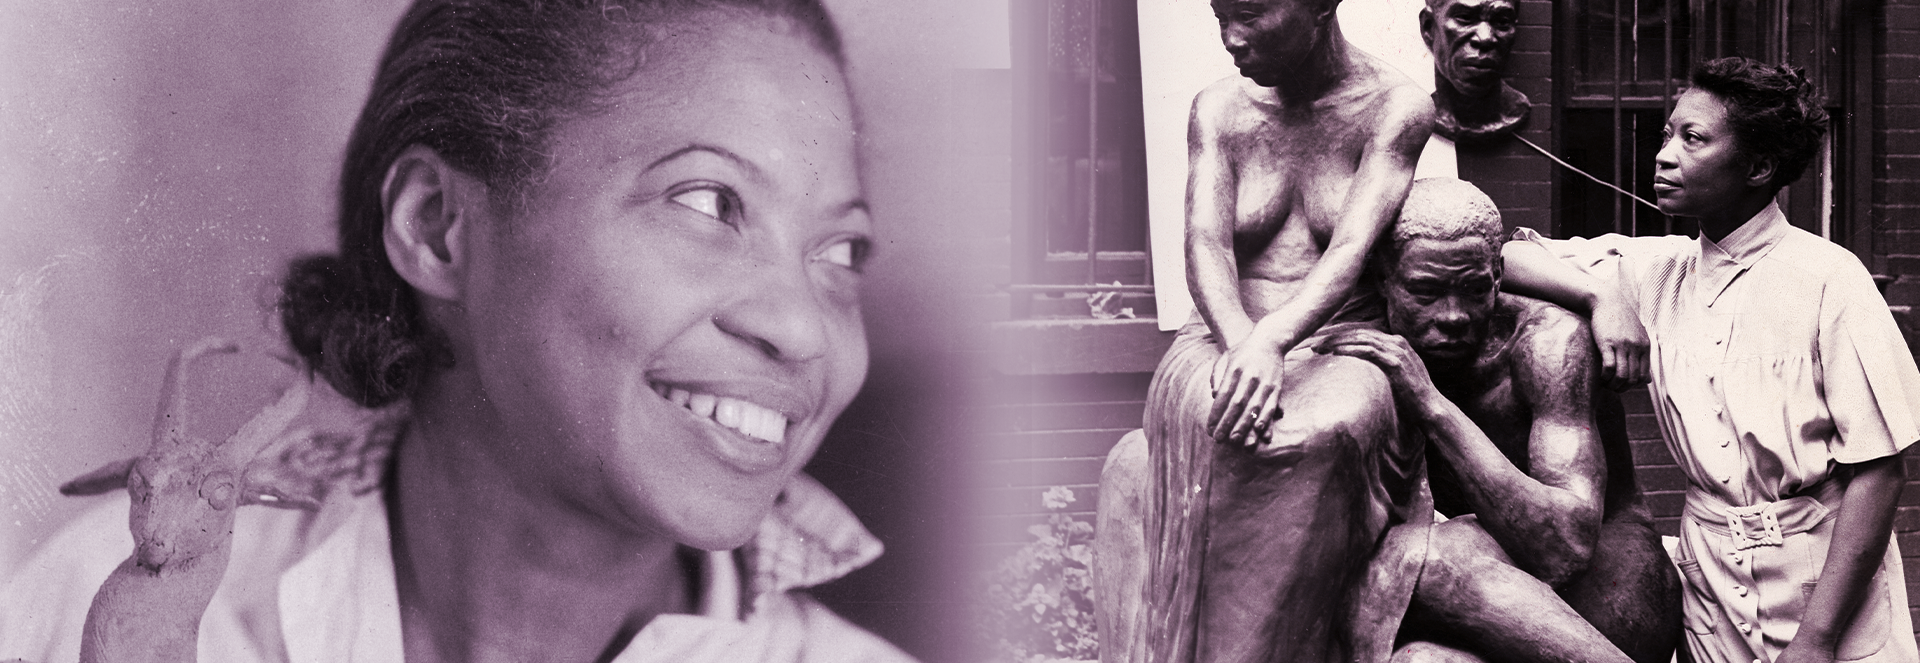 Montage of Augusta Savage smiling and leaning on a sculpture